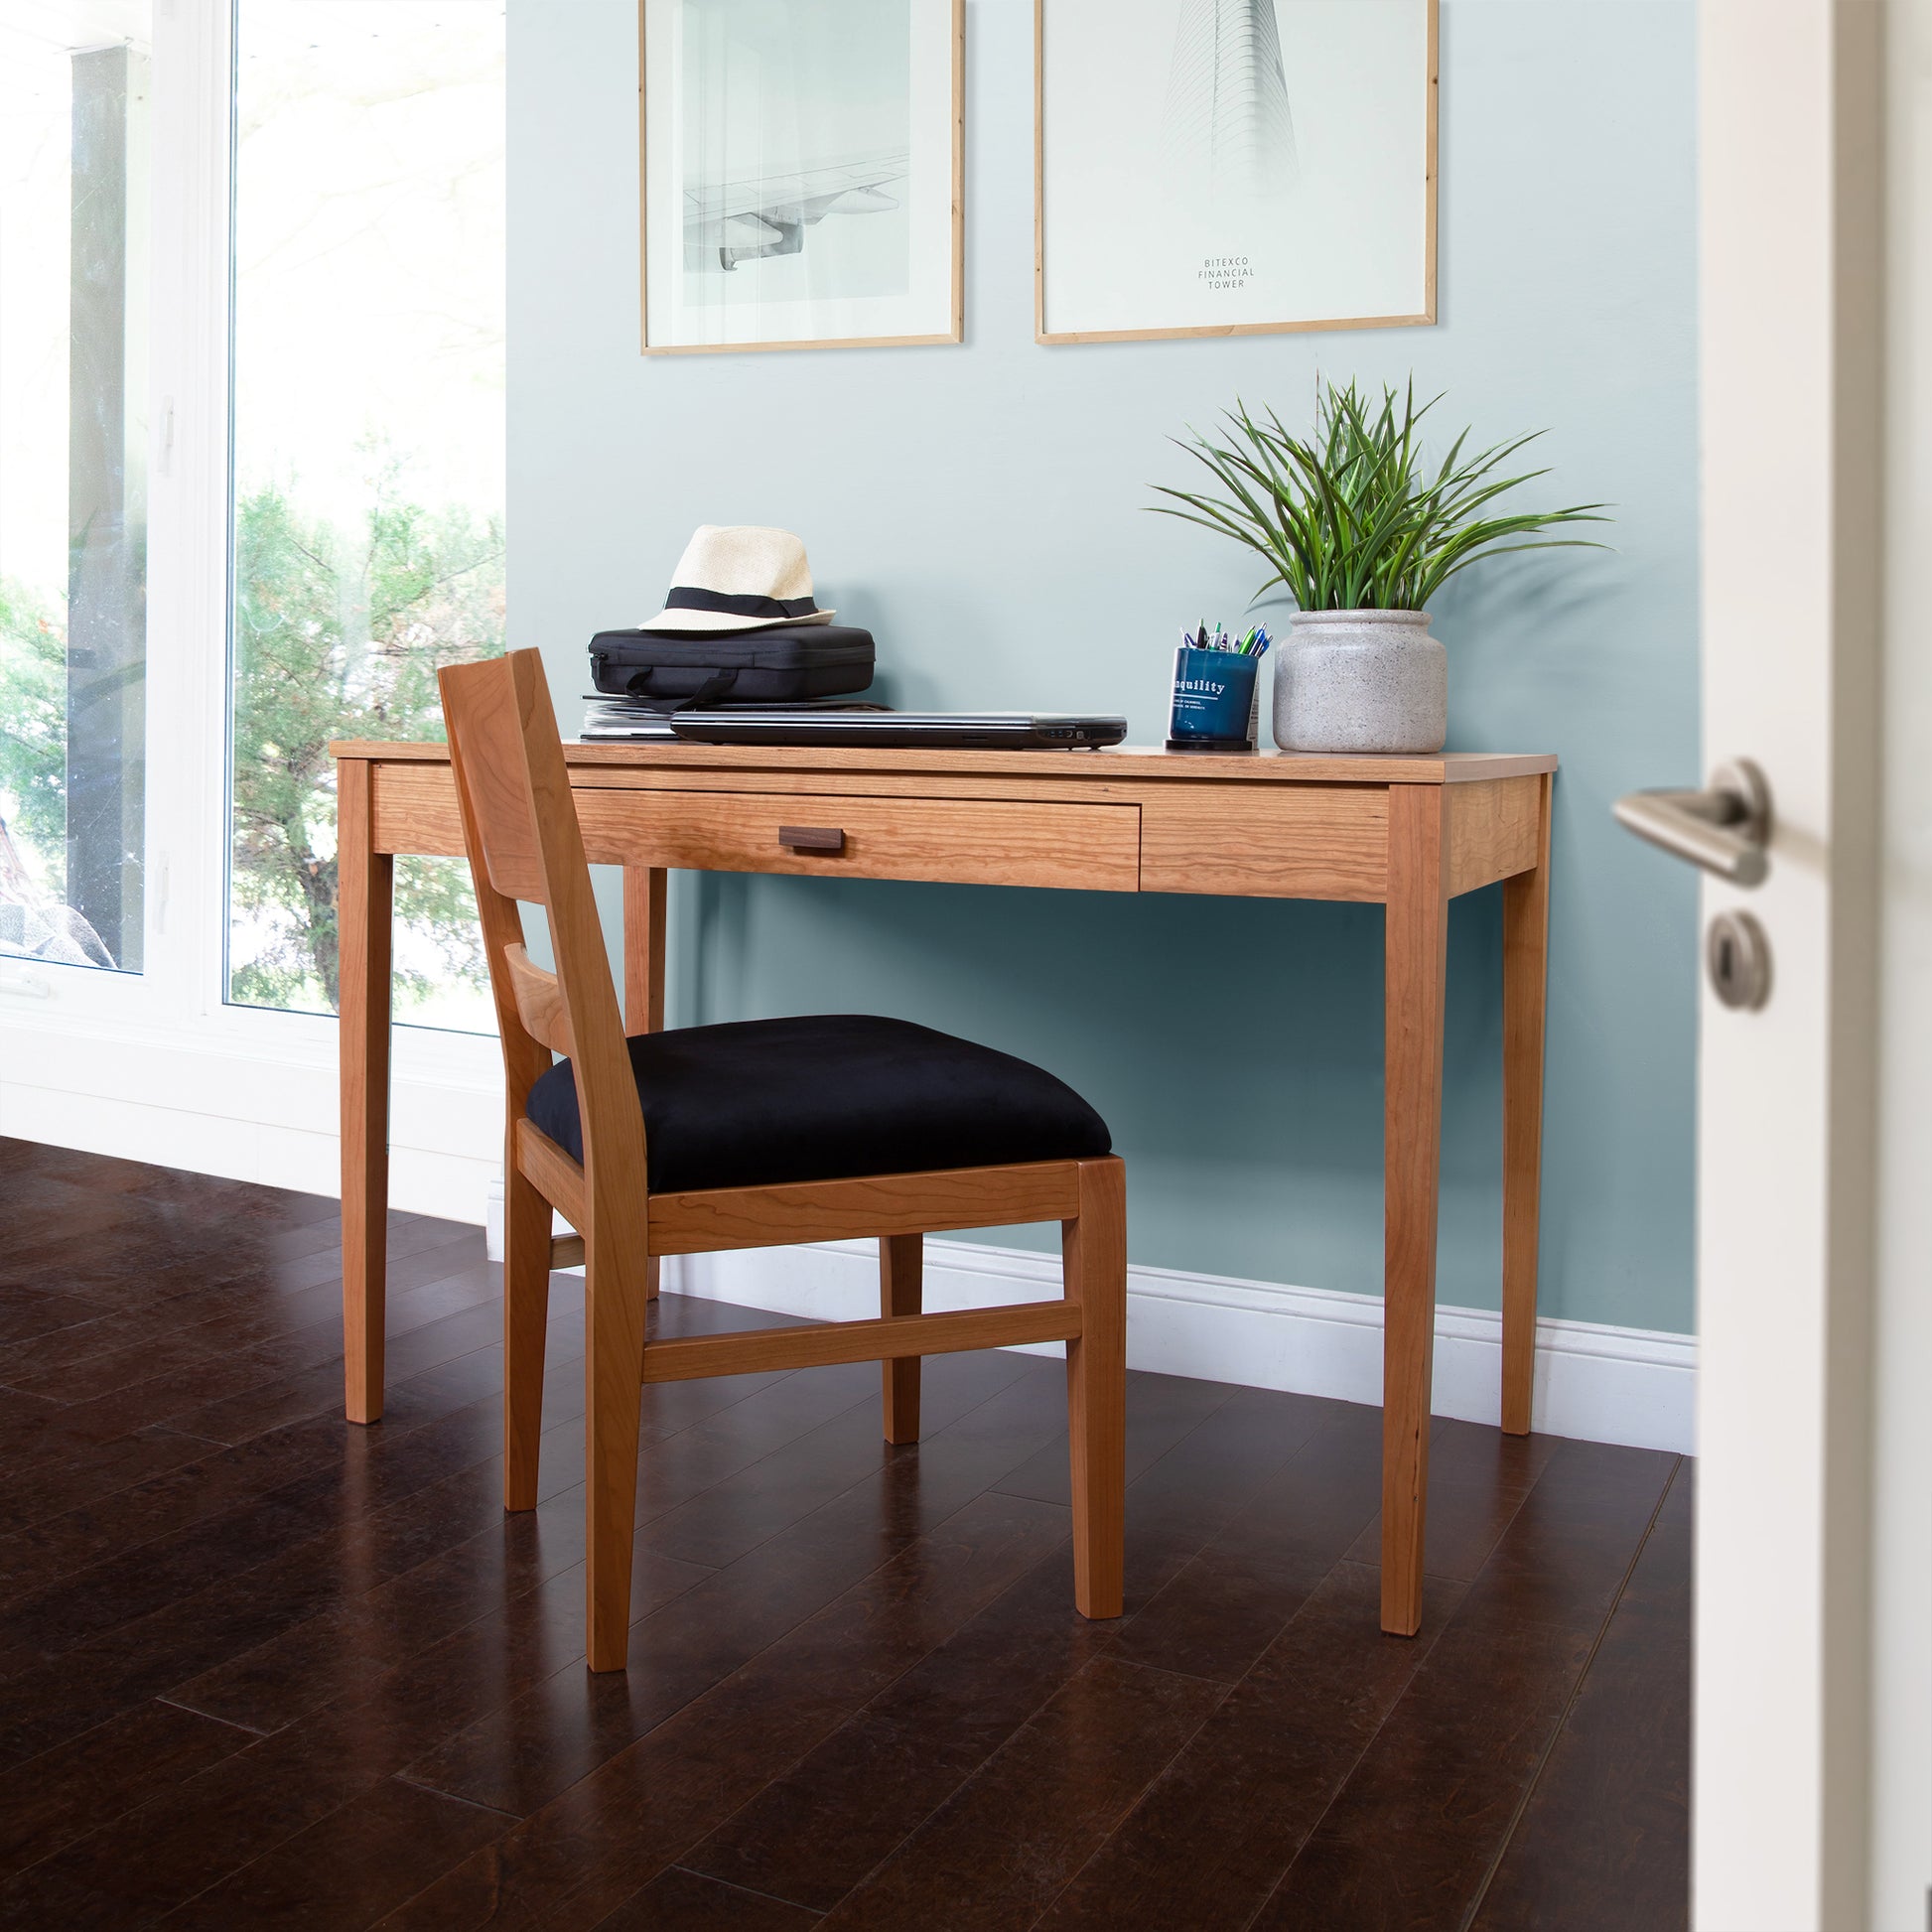 A Maple Corner Woodworks Vermont Shaker Writing Desk with an open drawer and a black chair set on a dark hardwood floor against a pale blue wall, with a decorative plant, laptop, notebook, and a